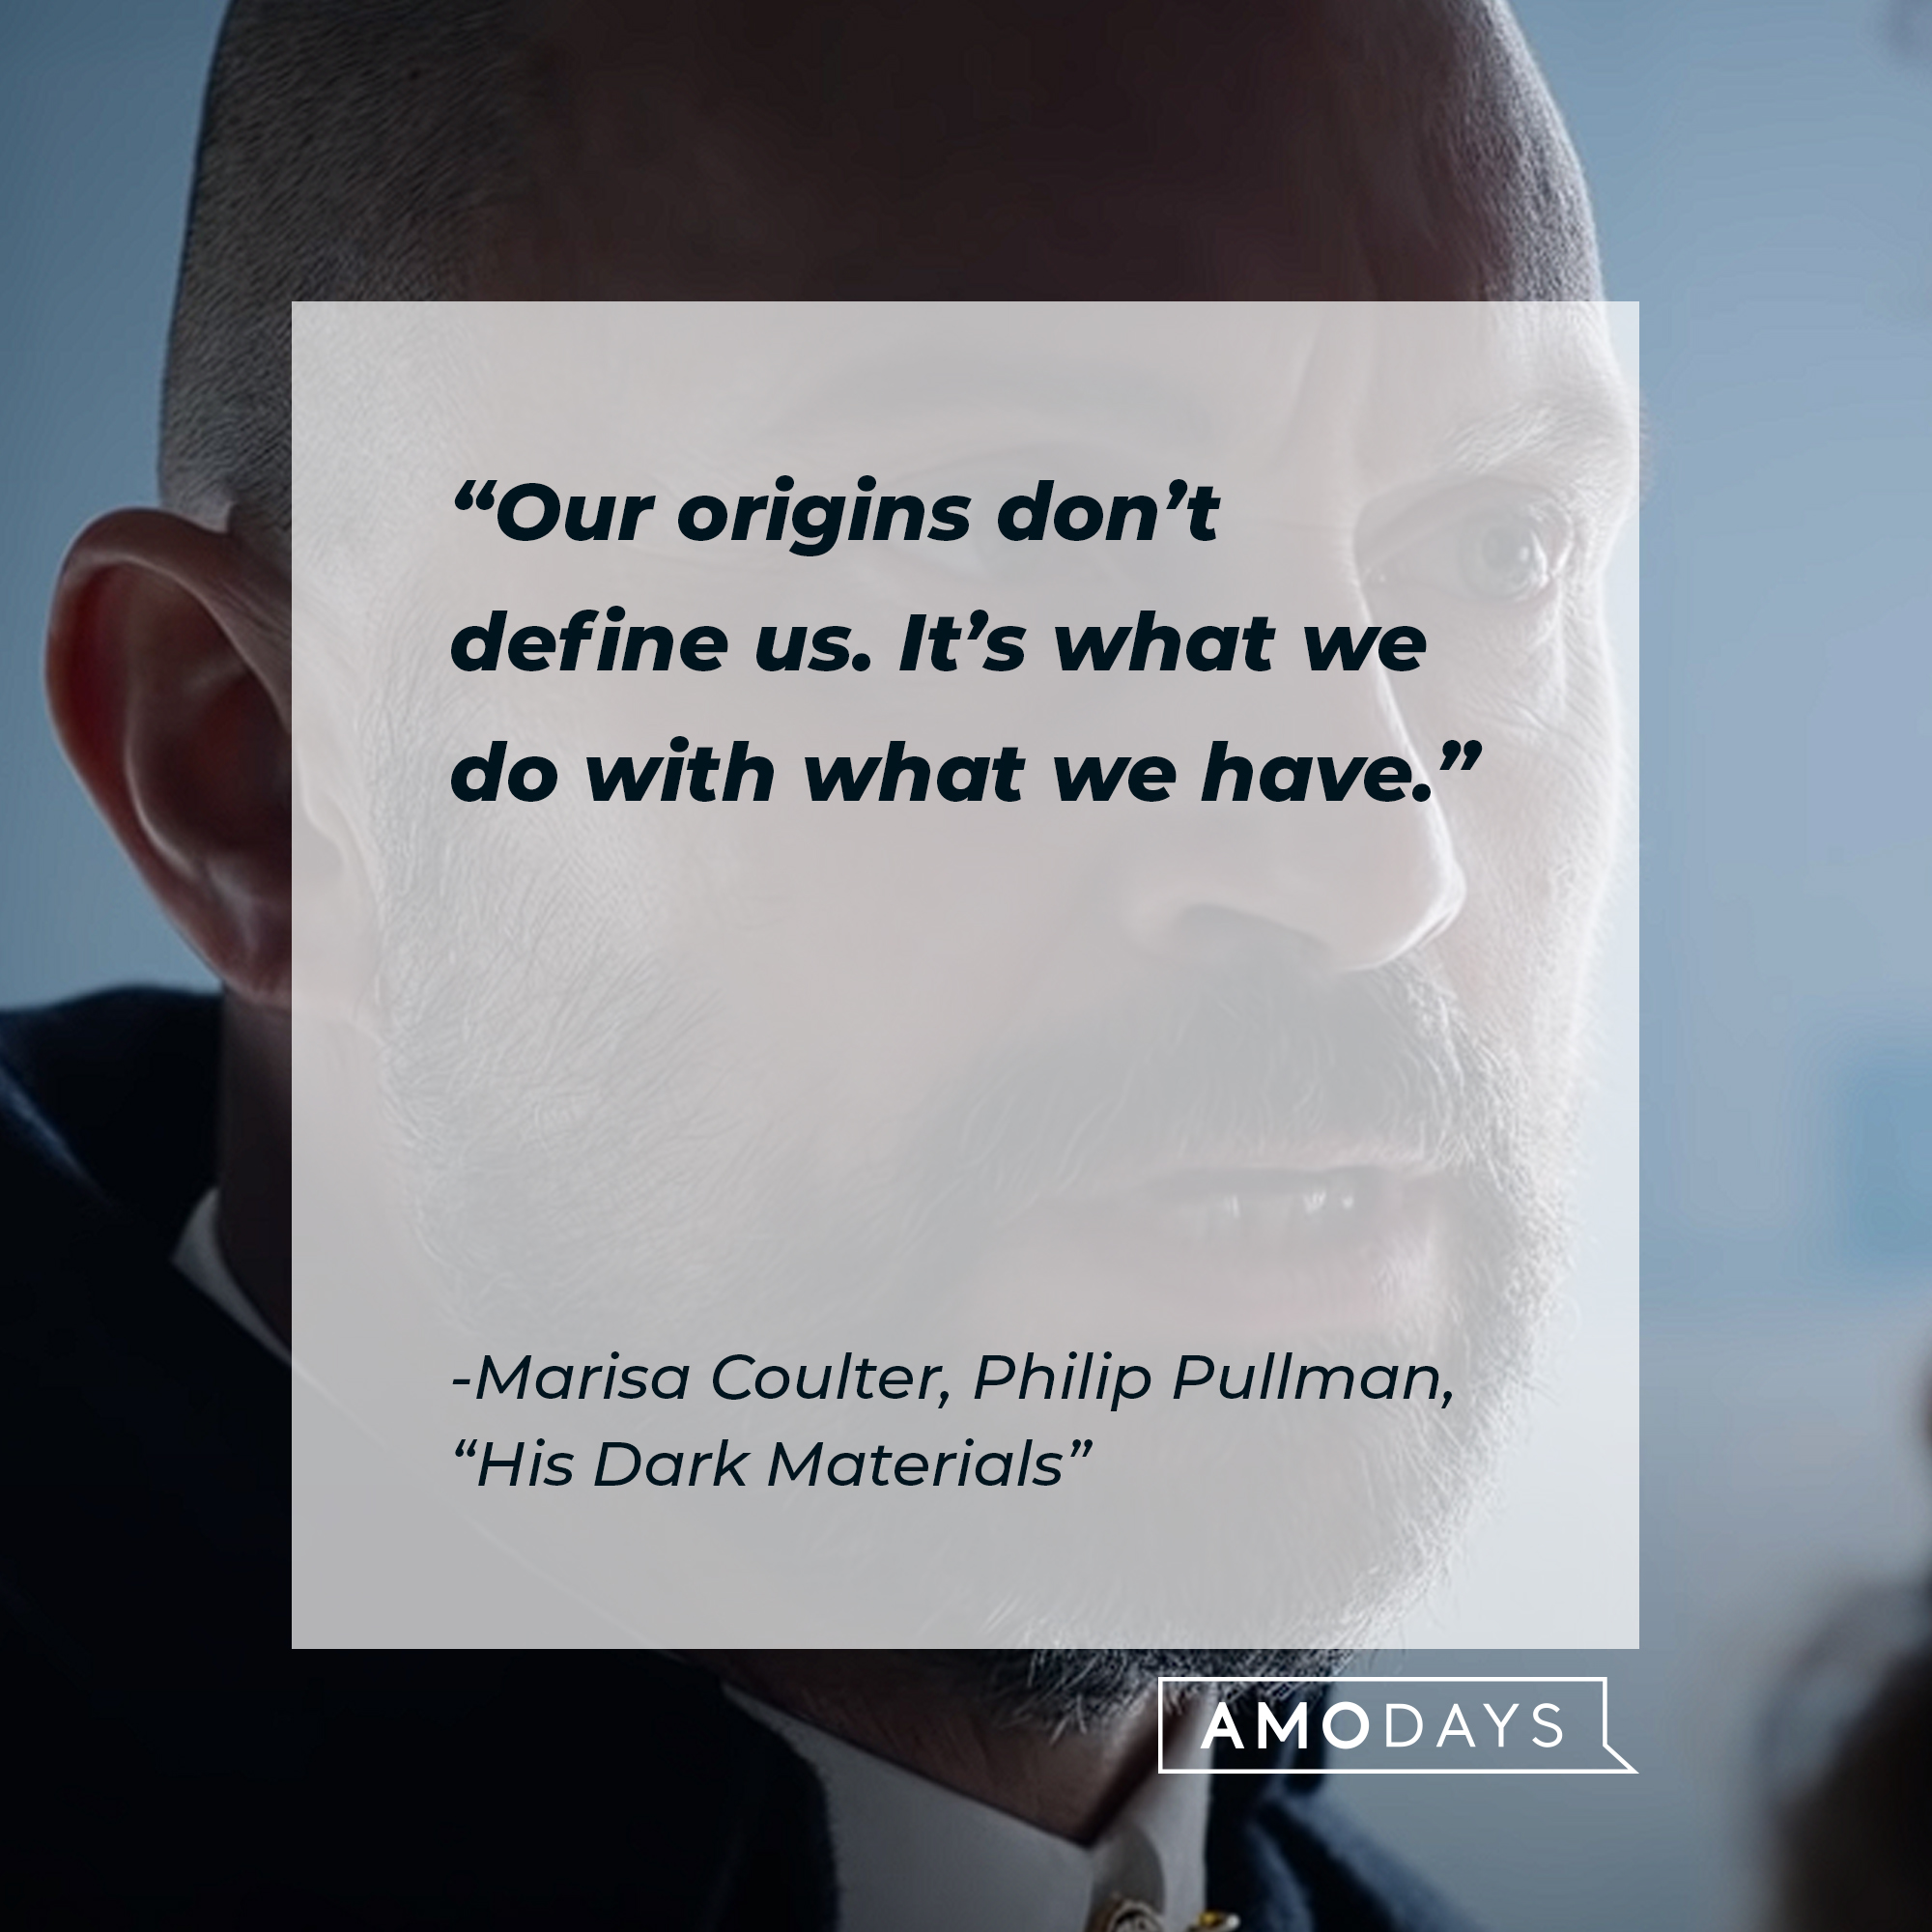 An image of a character with a quote from the character from"His Dark Materials": “Our origins don’t define us. It’s what we do with what we have.” | Source: youtube.com/HBO